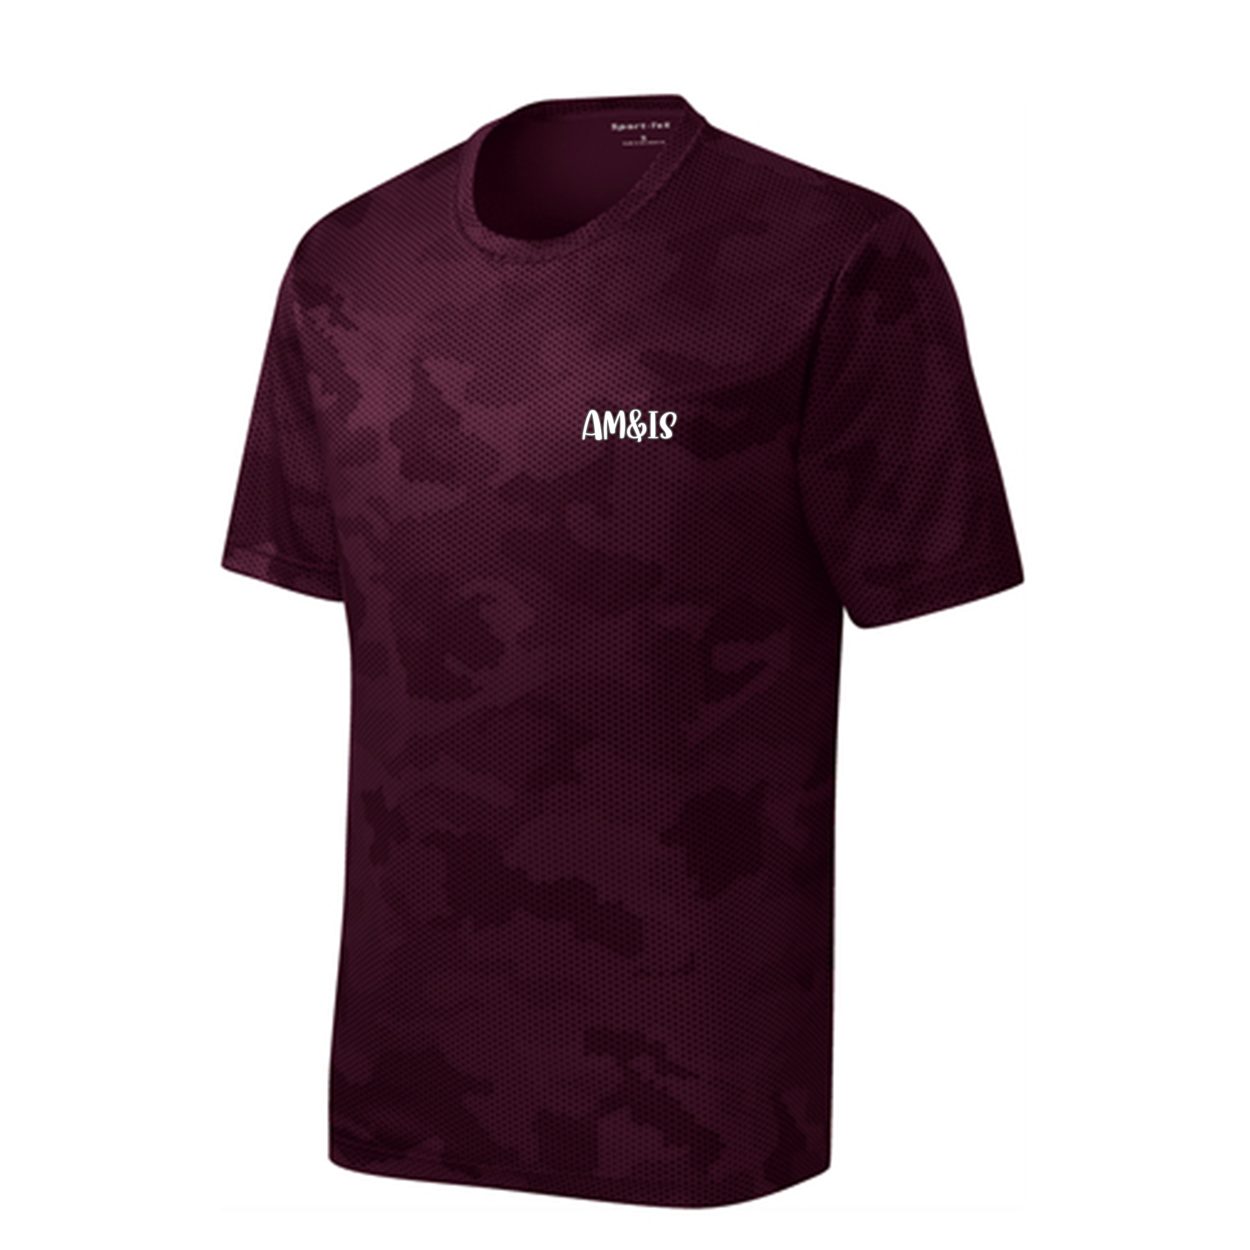 MAROON - Am&Is Activewear Sport-Tek® Youth CamoHex Tee - kids t-shirts at TFC&H Co.